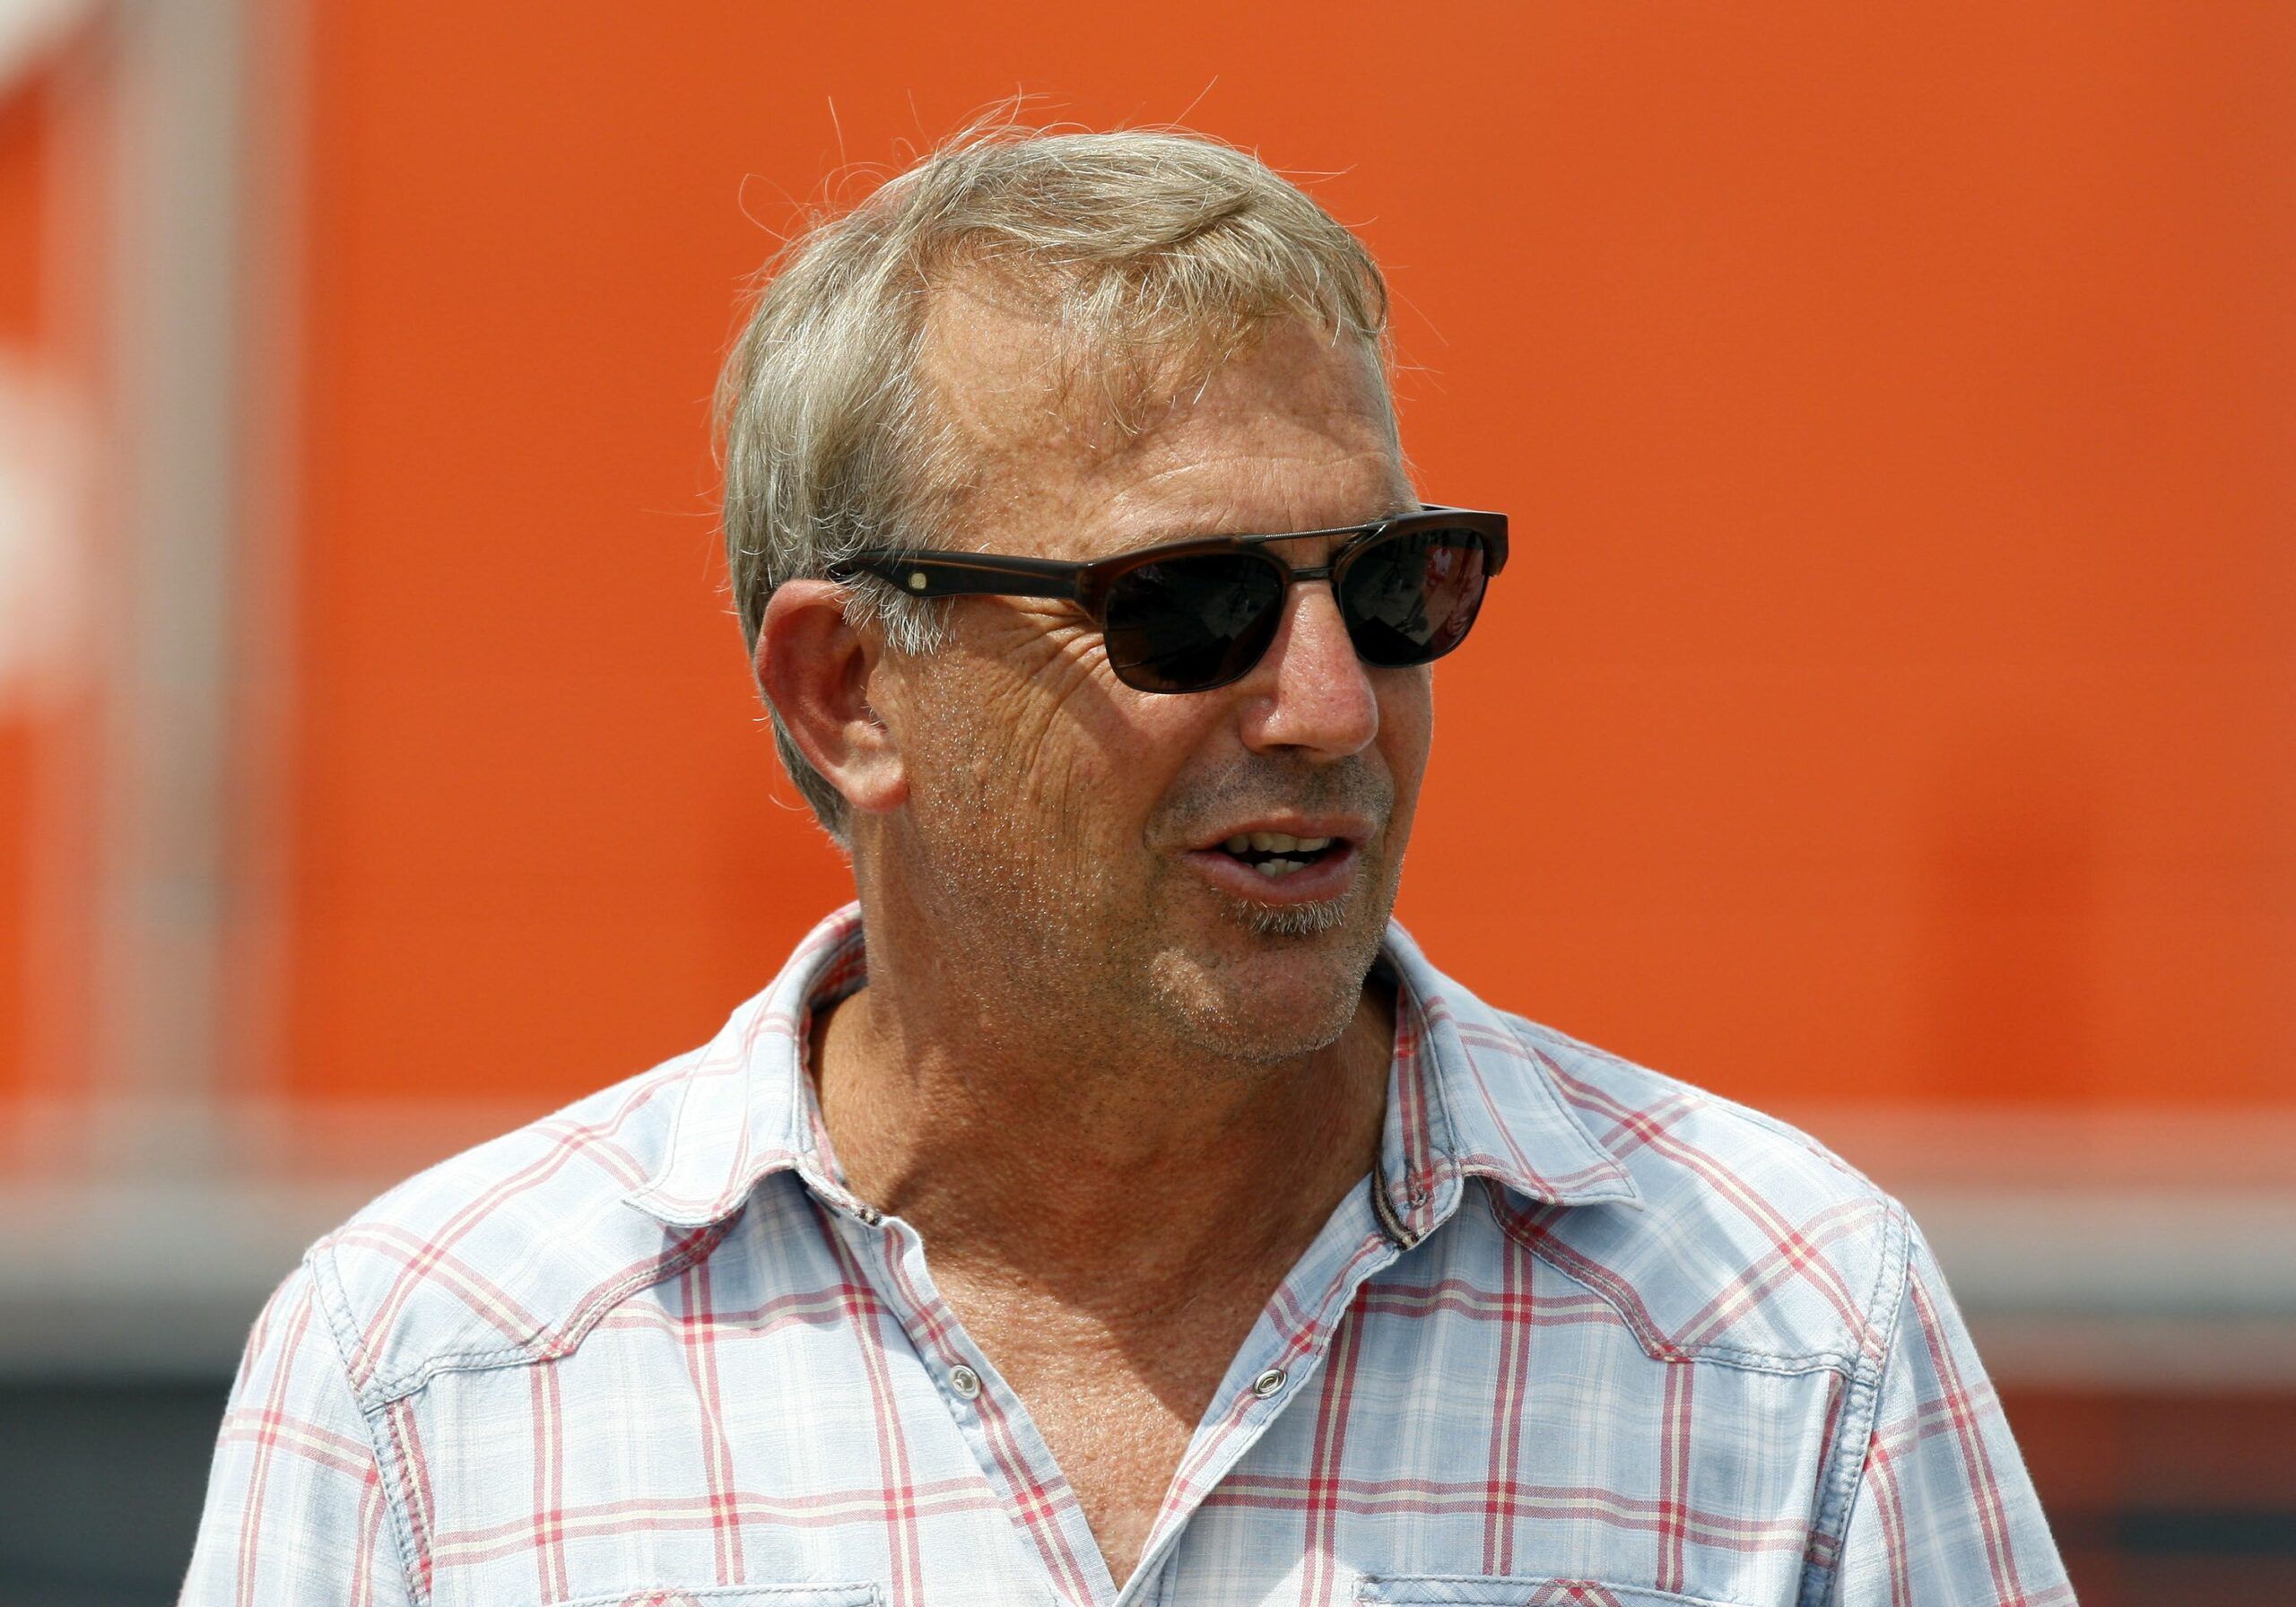 Actor Kevin Costner, founding partner of Ocean Therapy Solutions Inc., speaks at a conference in Port Fourchon, Louisiana, U.S.